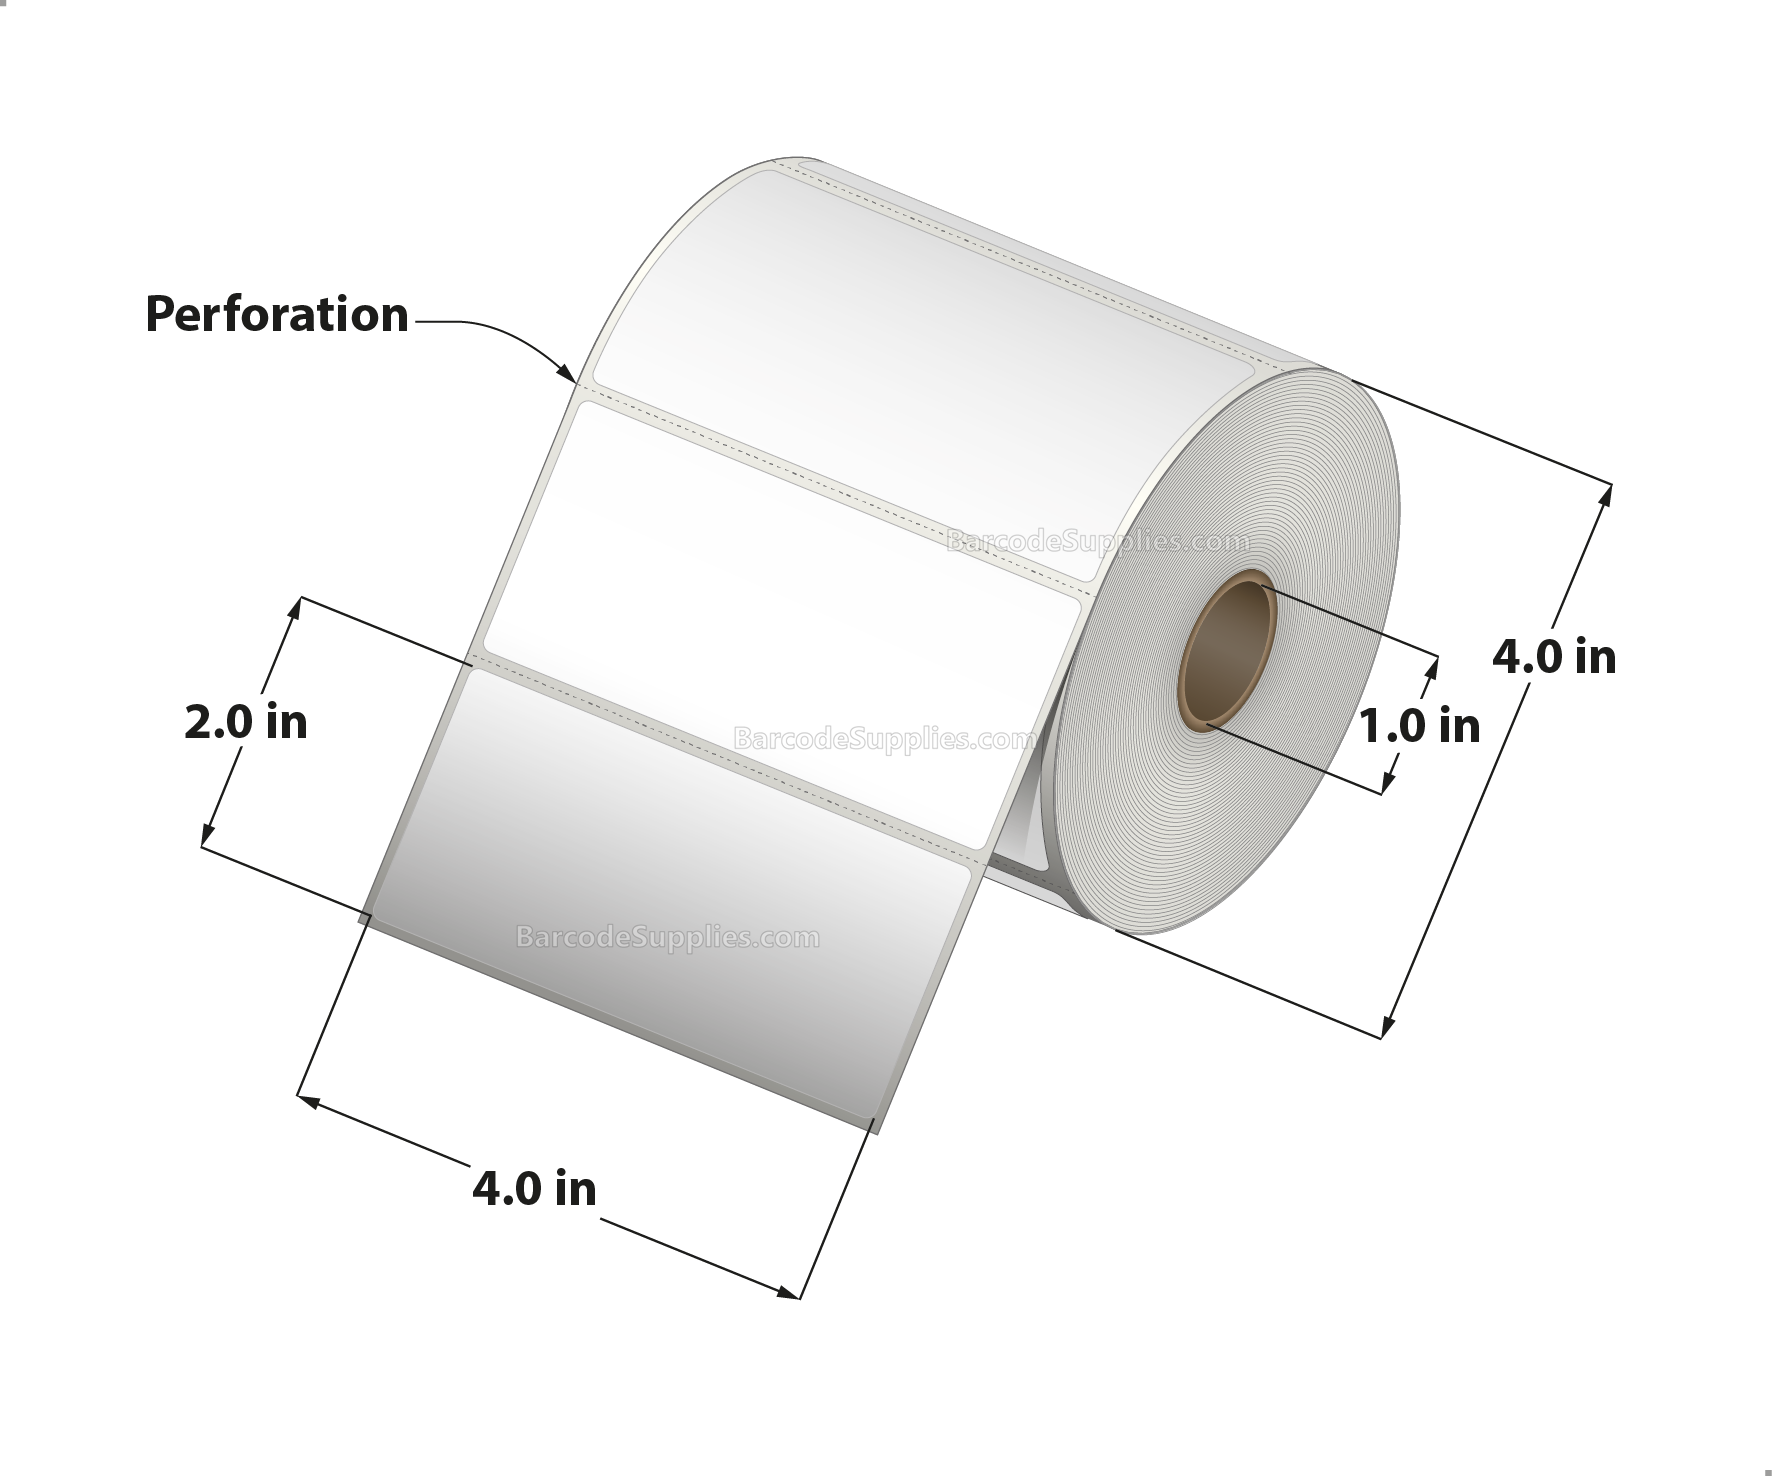 4 x 2 Thermal Transfer White Labels With Permanent Acrylic Adhesive - Perforated - 730 Labels Per Roll - Carton Of 4 Rolls - 2920 Labels Total - MPN: TH42-14PTT